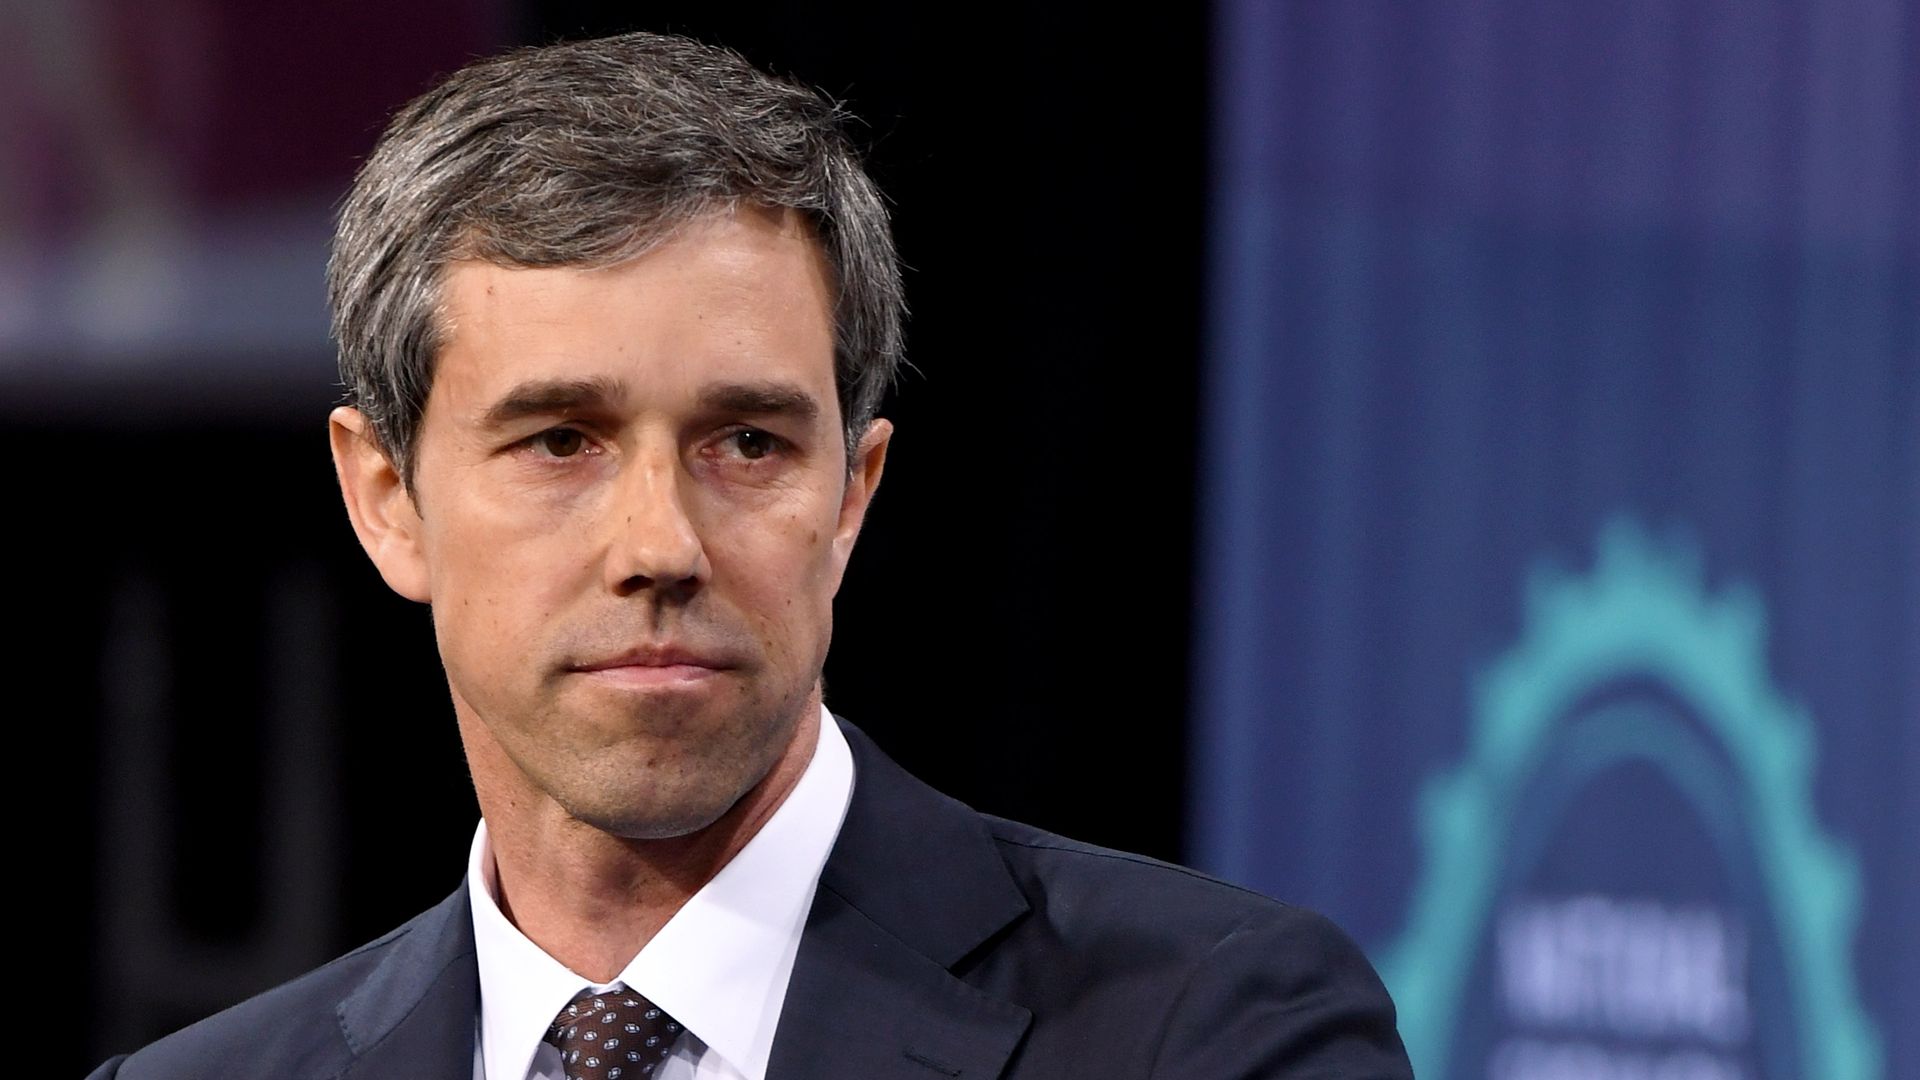  Democratic presidential candidate Beto O'Rourke at the National Forum on Wages and Working People: Creating an Economy That Works for All at Enclave on April 27, 2019 in Las Vegas, Nevada